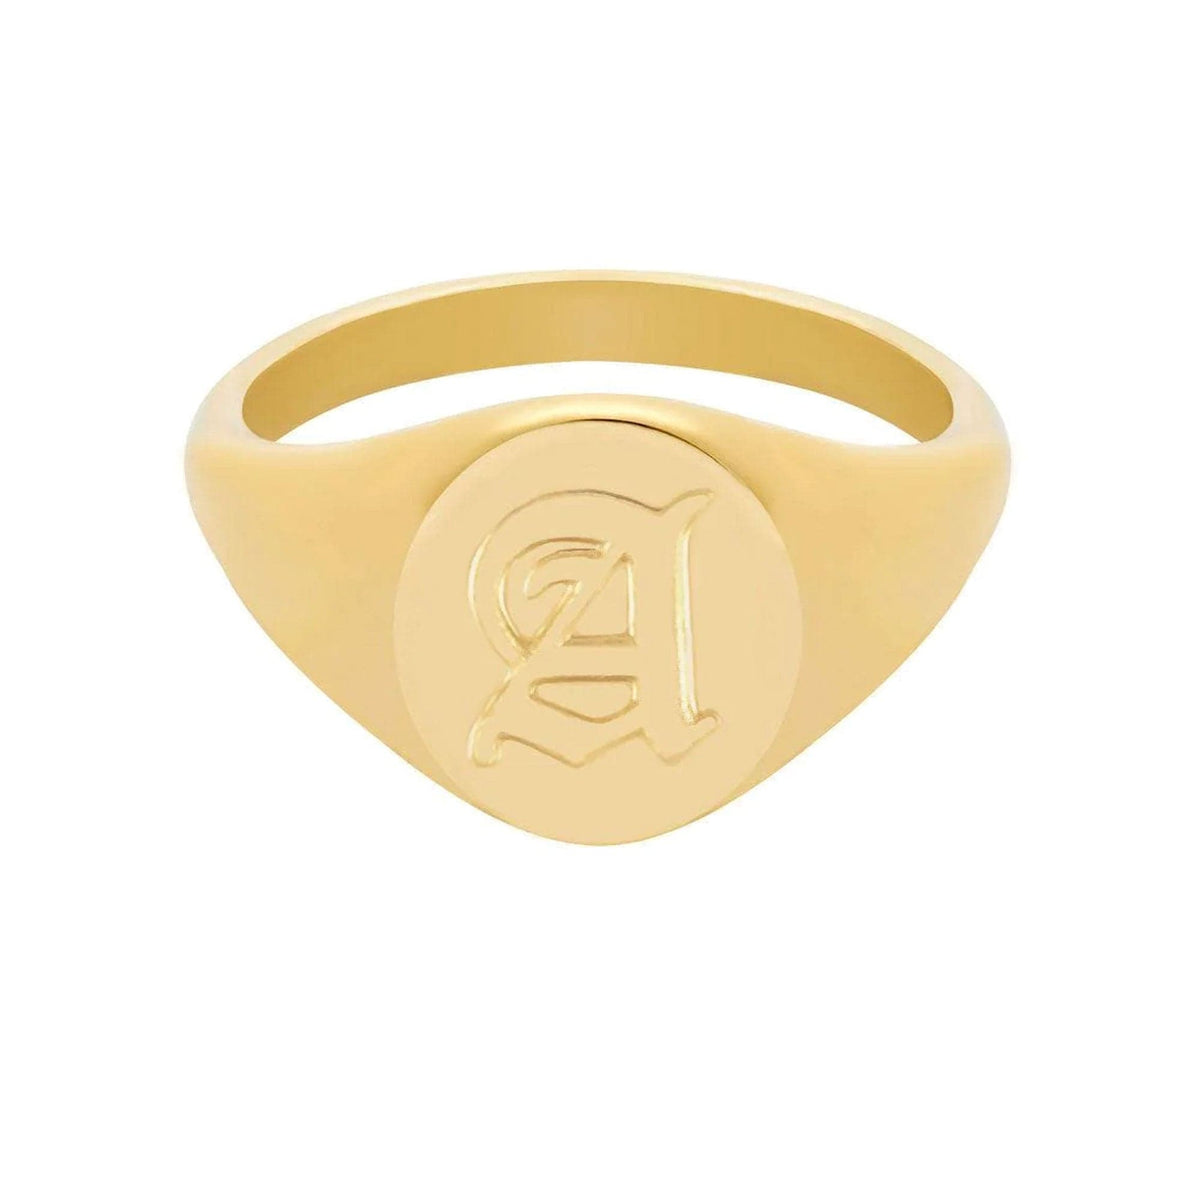 BOHOMOON Stainless Steel Dolce Initial Signet Ring Gold A / US 6 / UK L / EUR 51 (small)